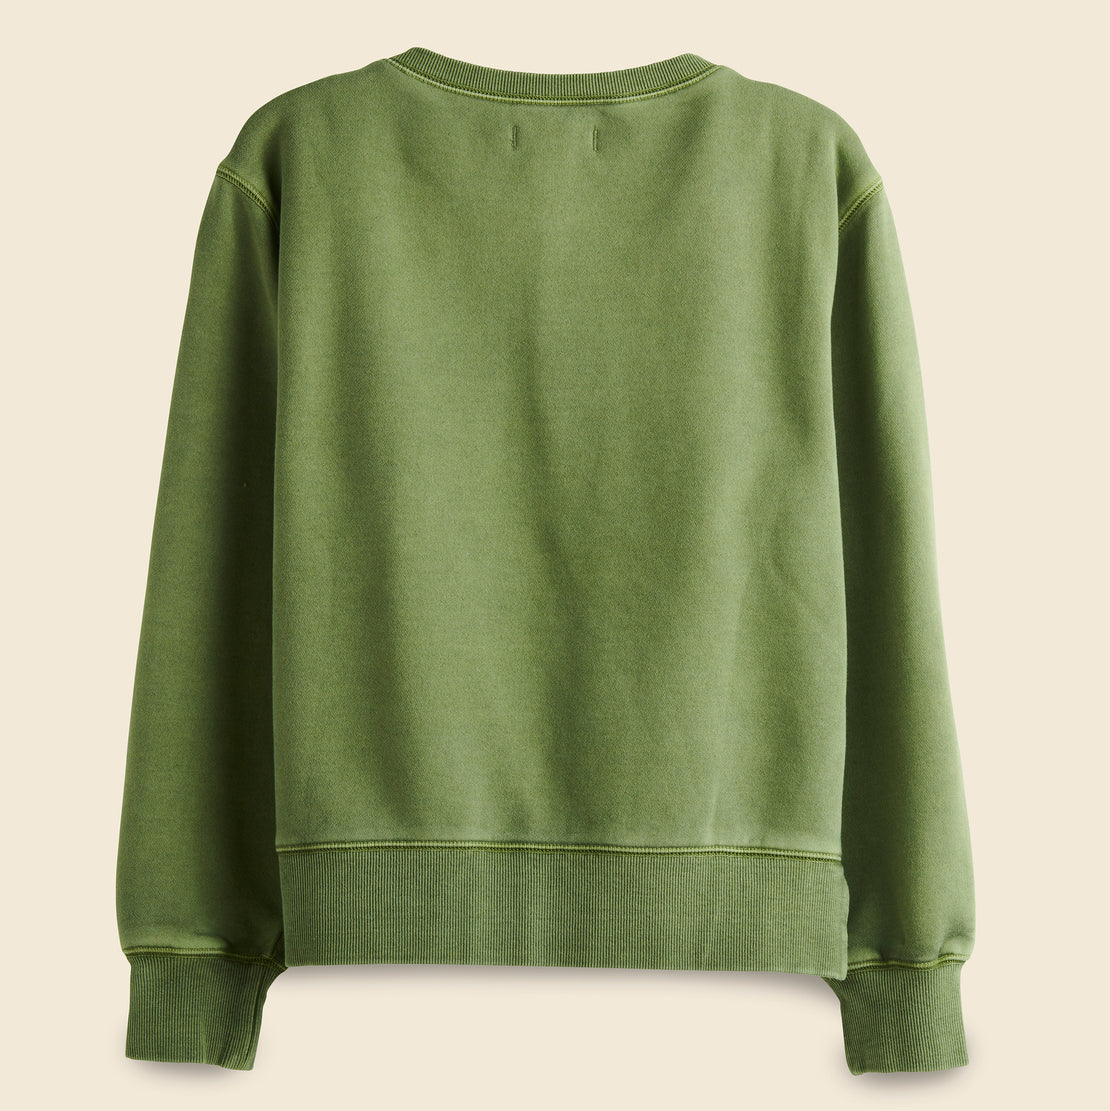 Lakeside Sweatshirt - Army Olive - Alex Mill - STAG Provisions - W - Tops - L/S Fleece